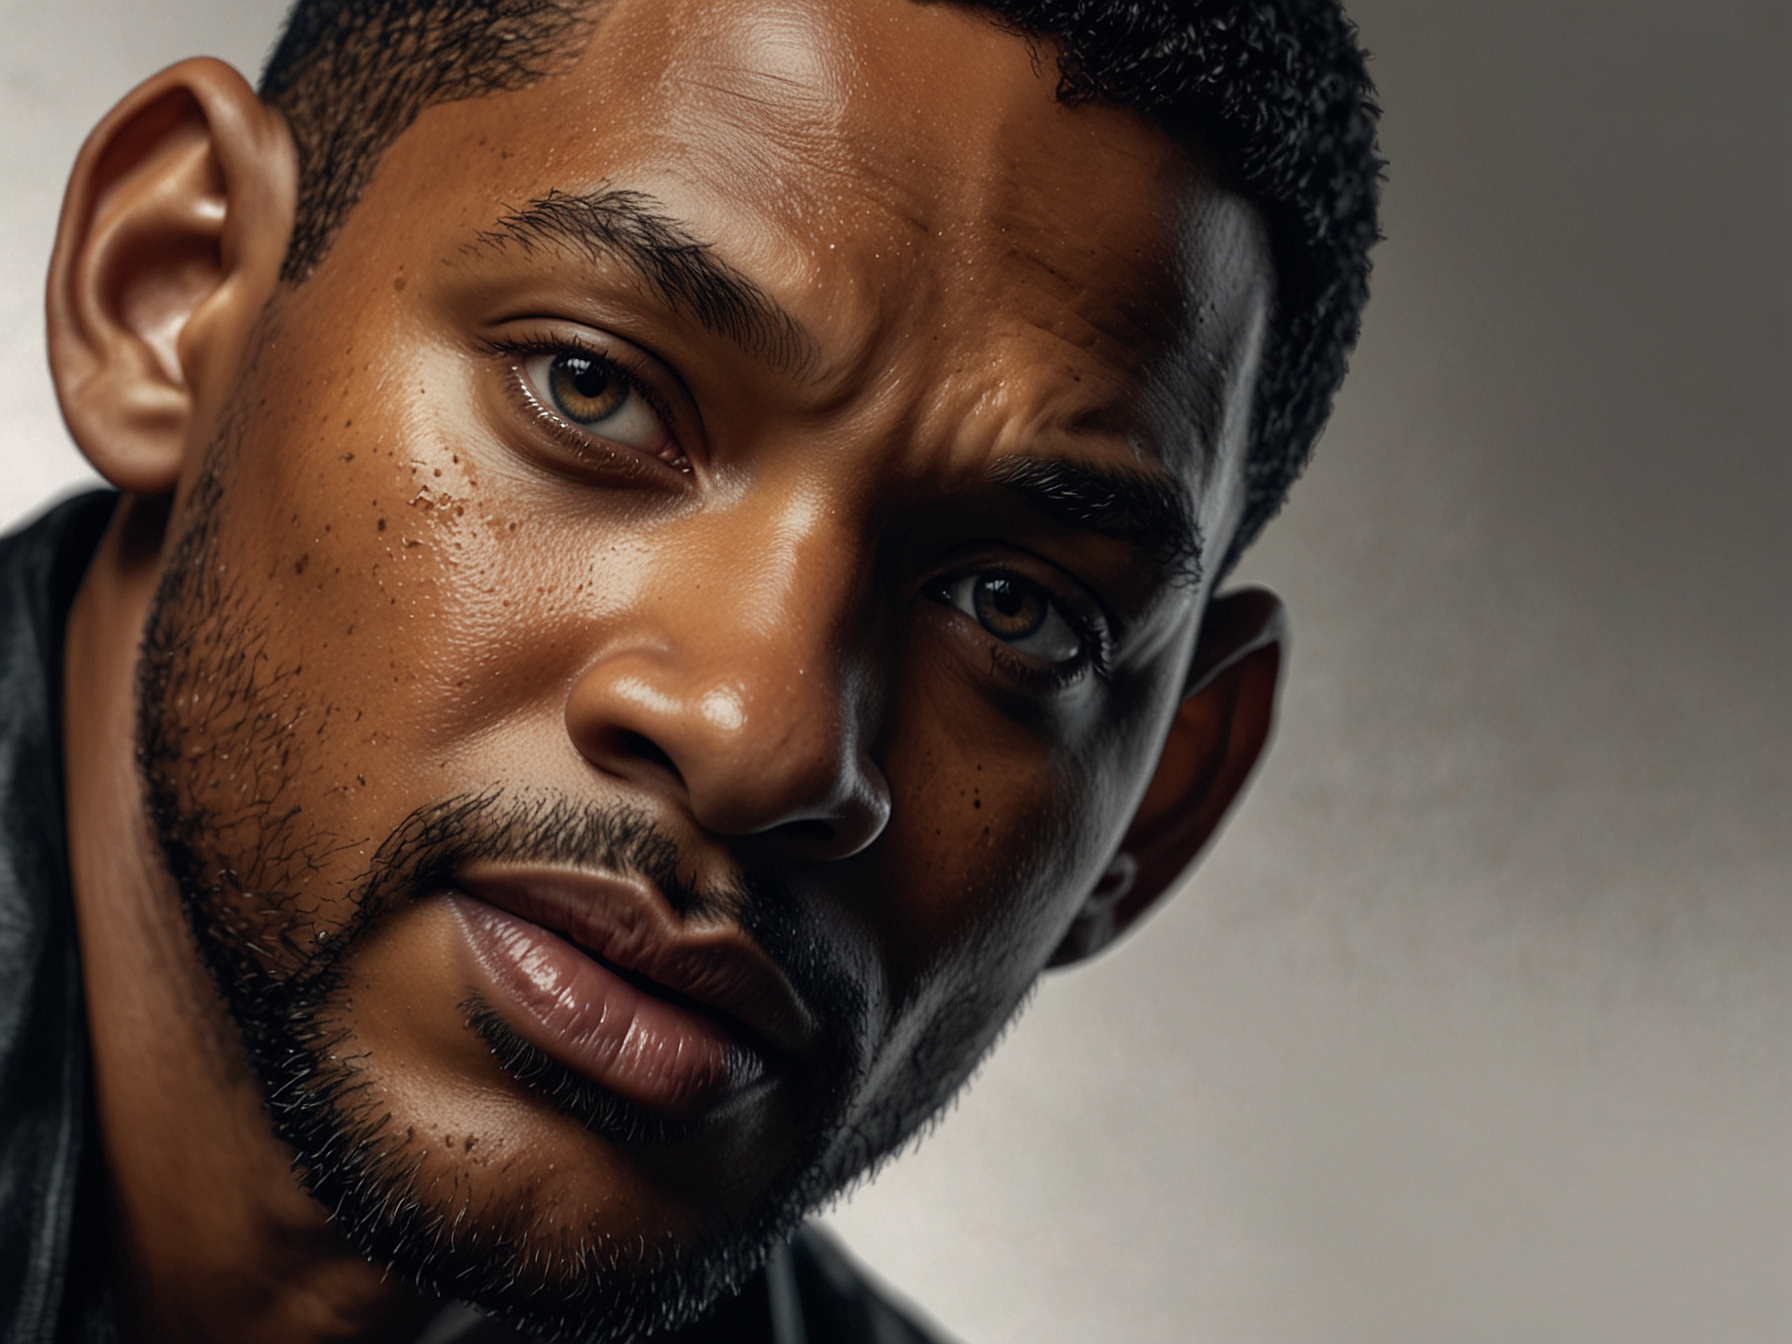 A close-up of Will Smith, looking reflective yet determined, symbolizing his journey of redemption and resilience following the notorious 2022 Oscars incident.